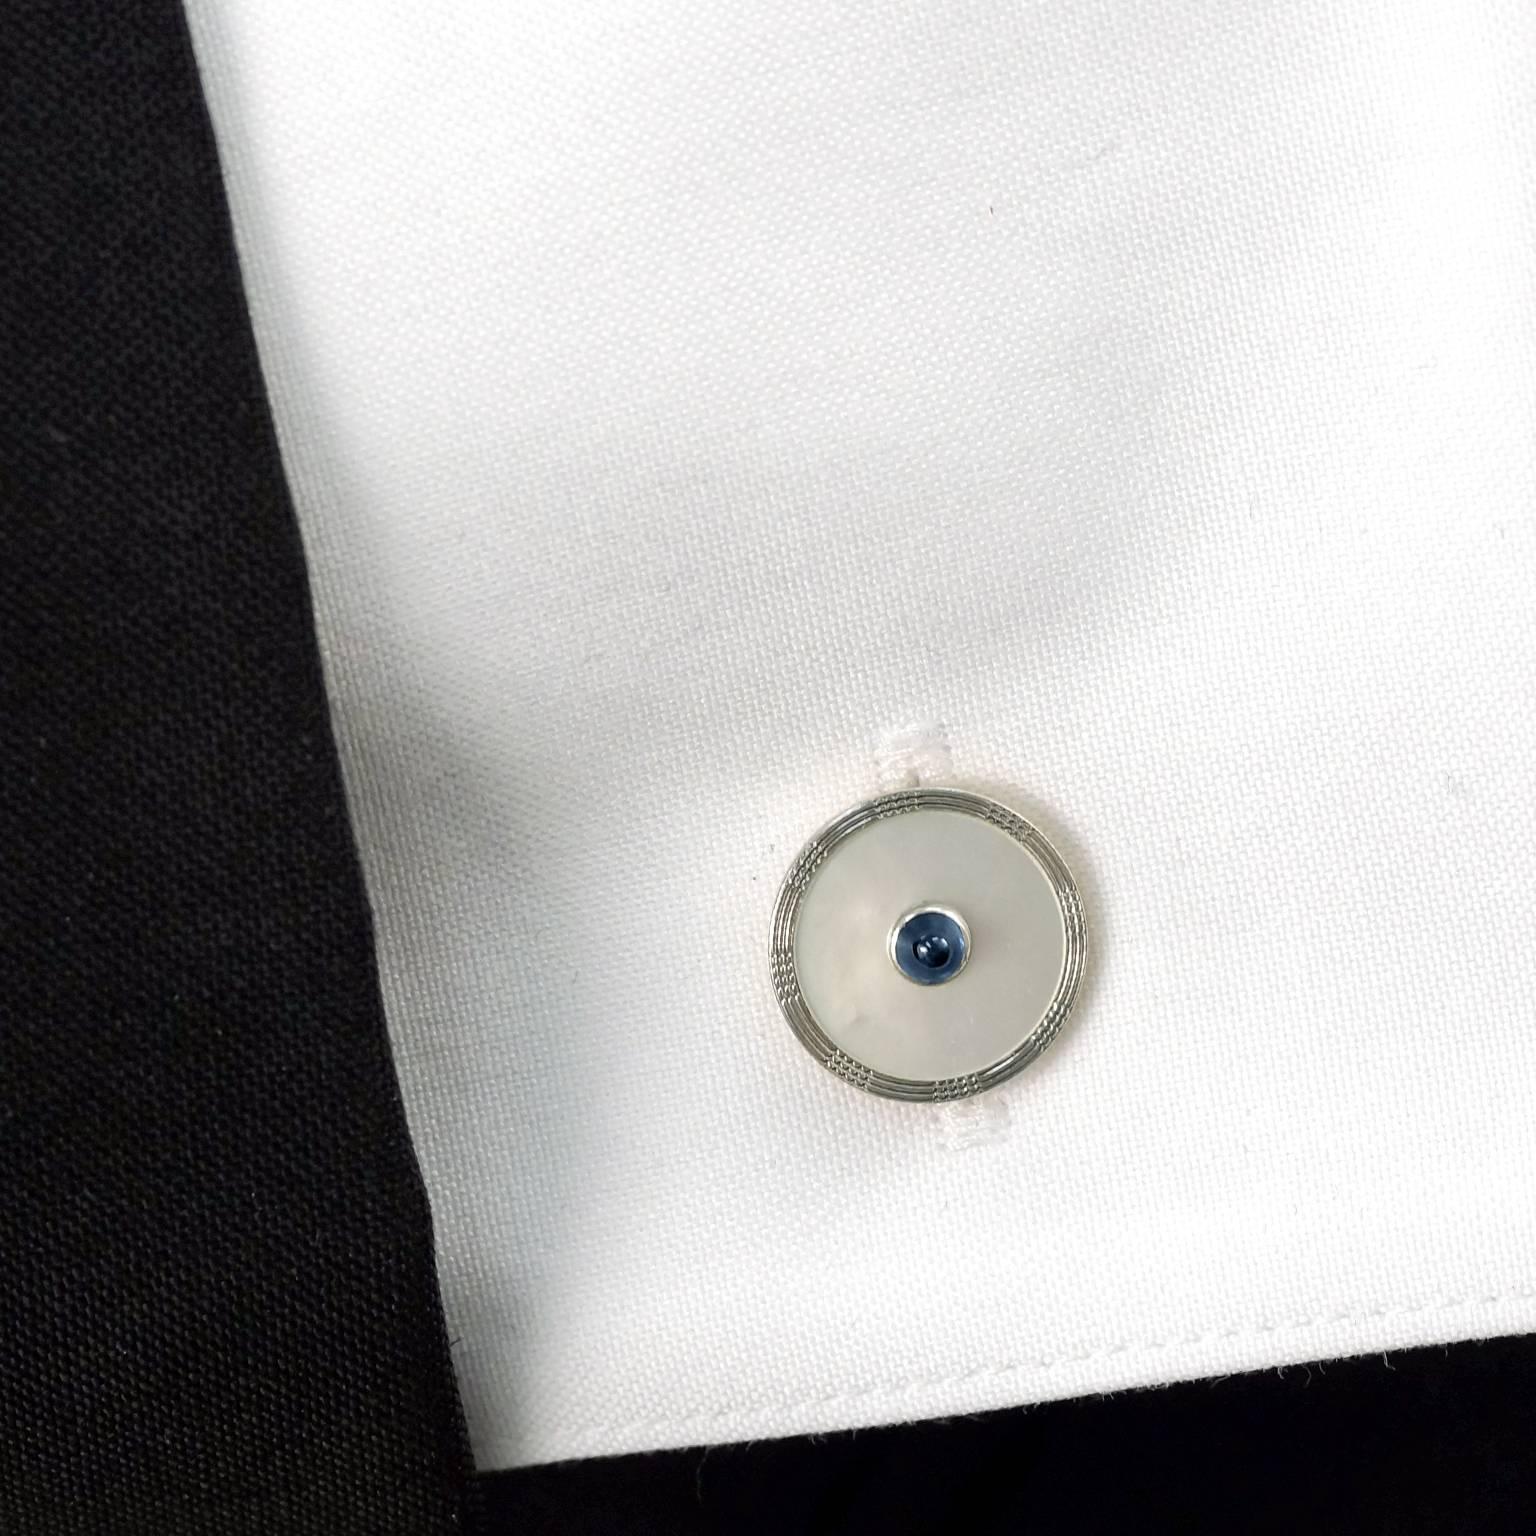 Circa 1950s, 14k, by Krementz, American.  This dapper fifties cufflink and stud set has a fresh, stylish look. The polished Mother of Pearl is enhanced by cabochon sapphires and framed with white gold. Beautifully made, they are in excellent